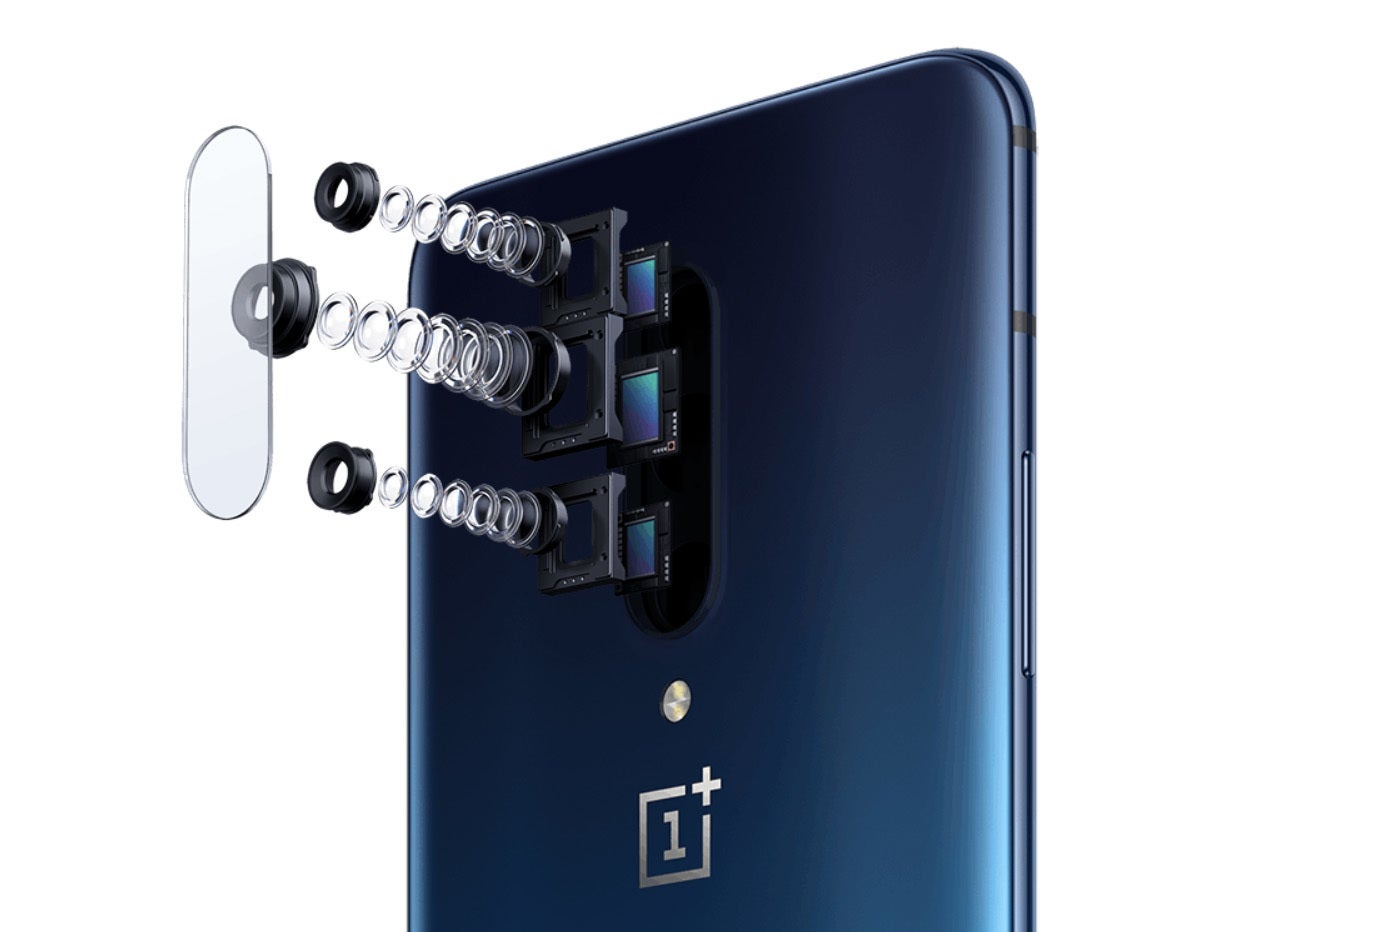 OnePlus 7 Pro is here: revolutionary display, pop-up camera and no notch